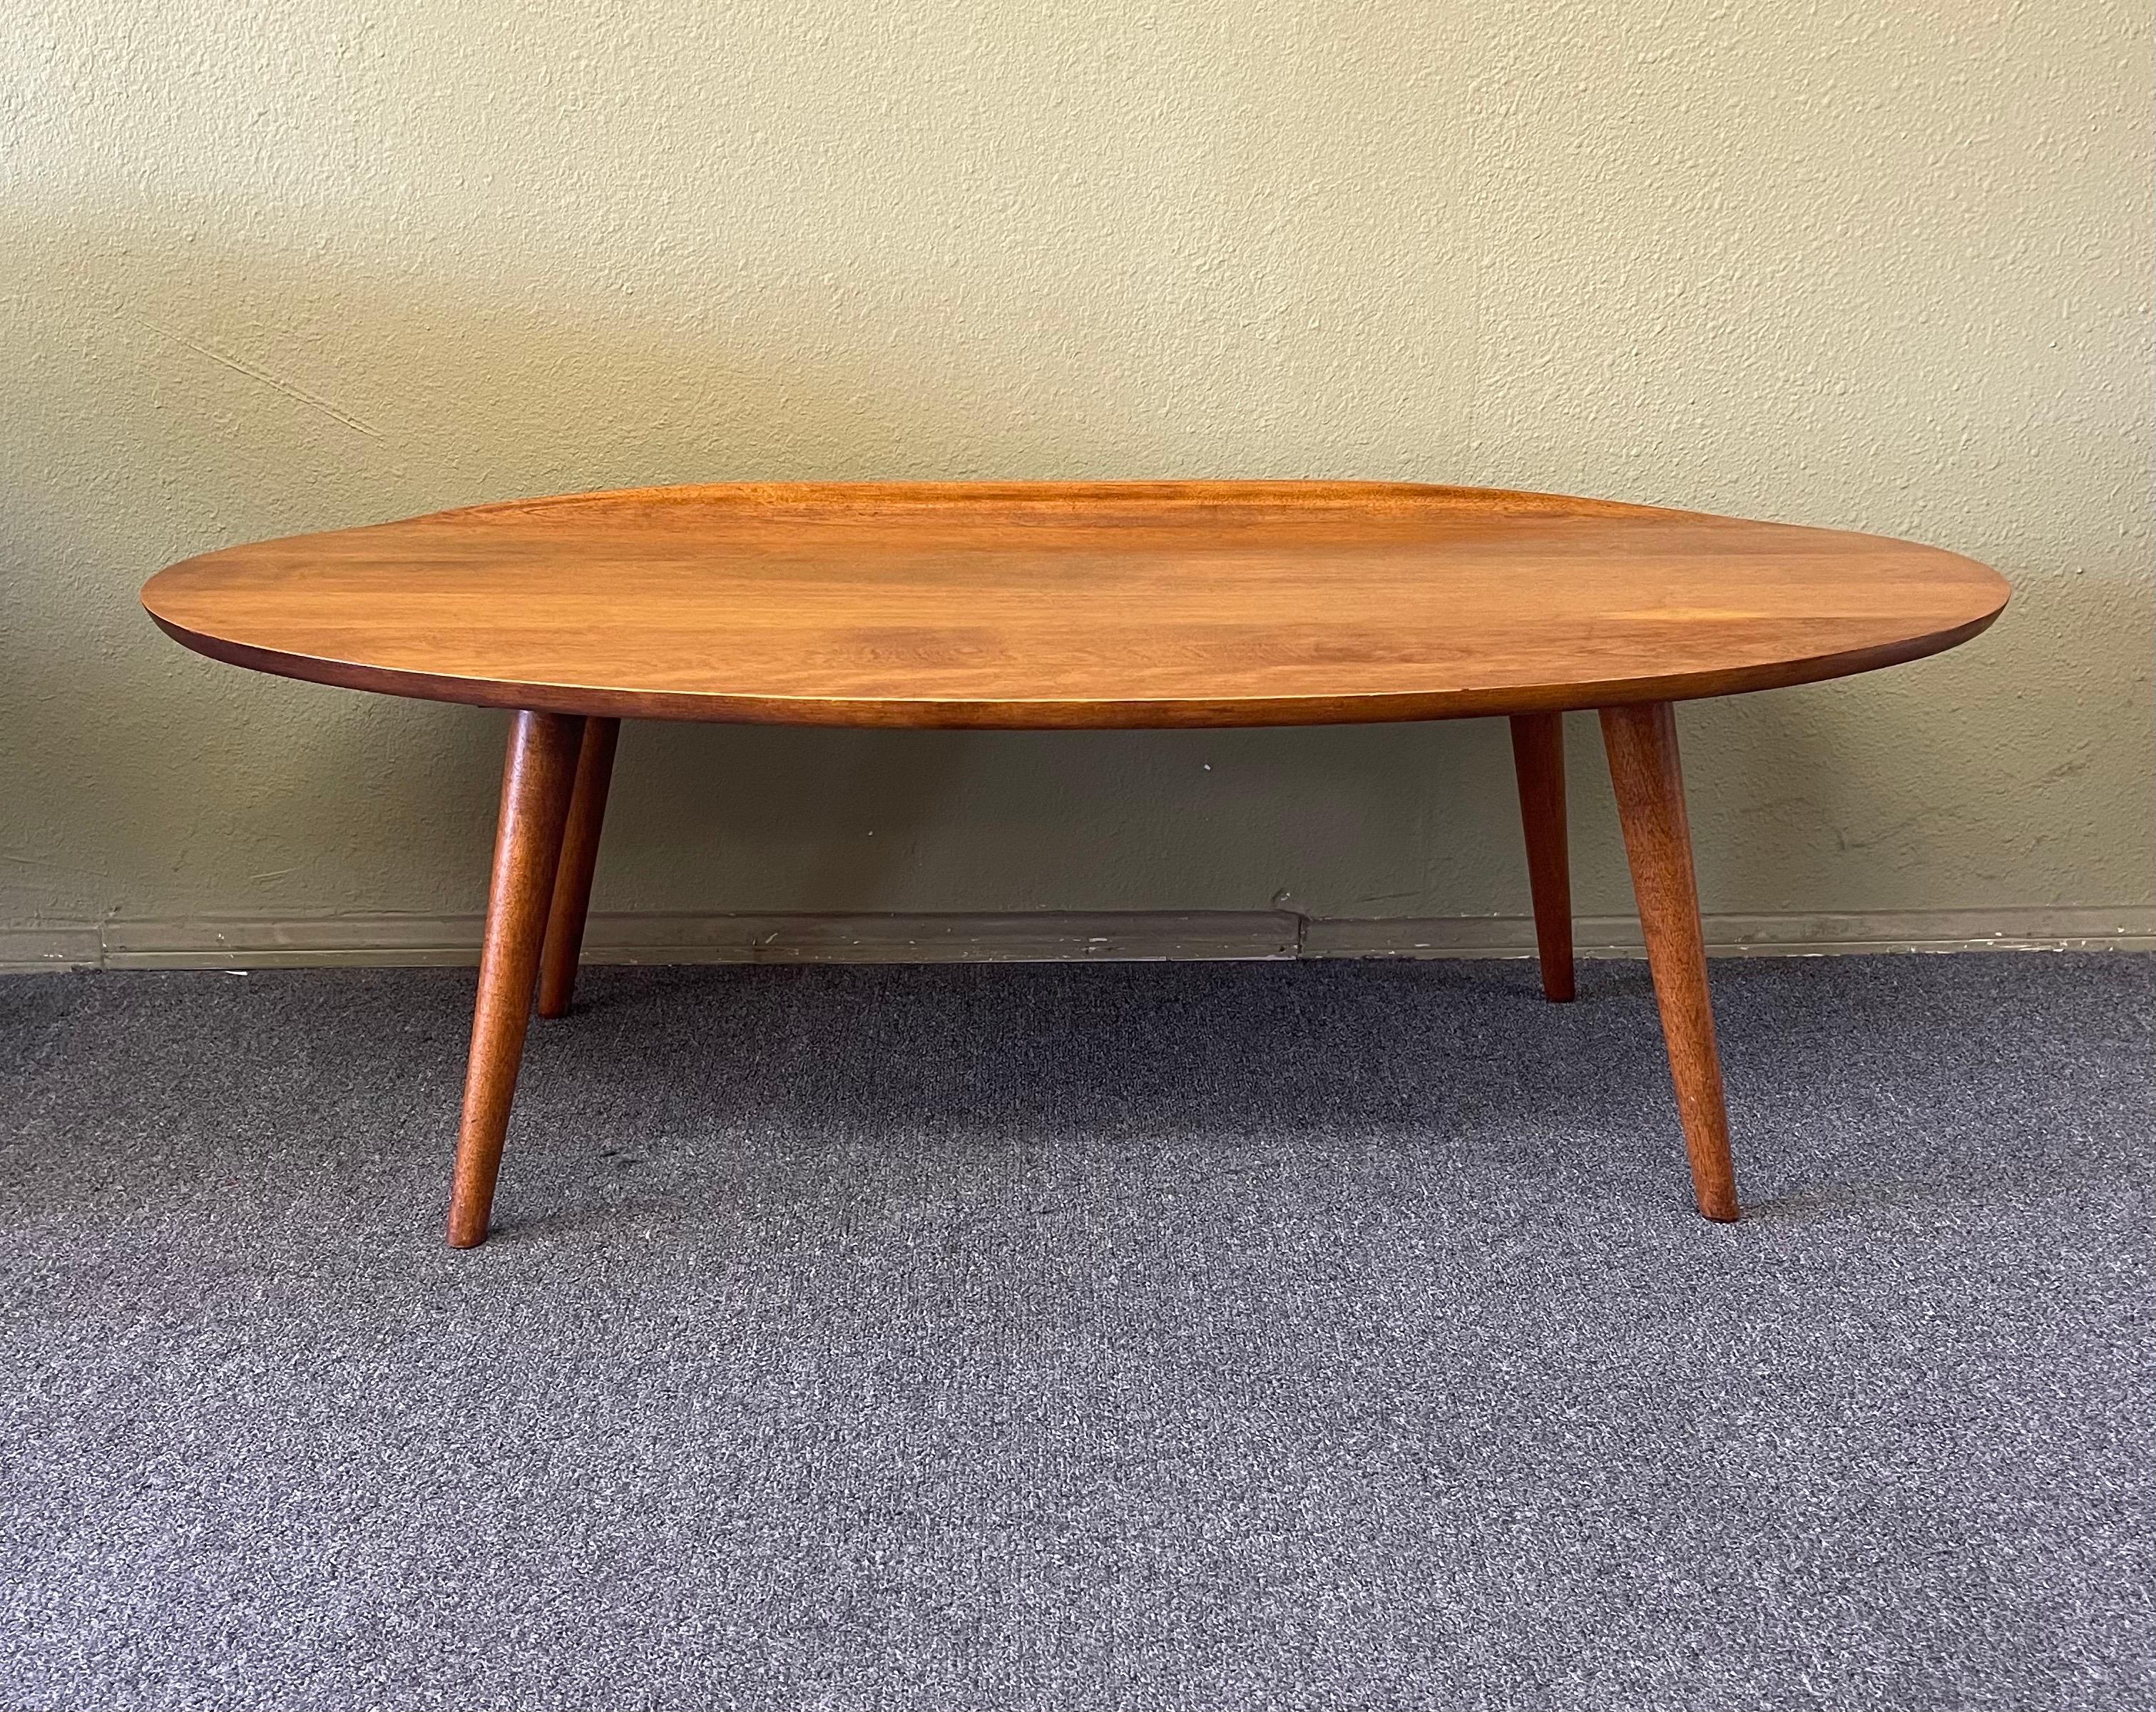 20th Century Mid-Century Modern Surfboard Coffee Table by Russel Wright for Conant Ball